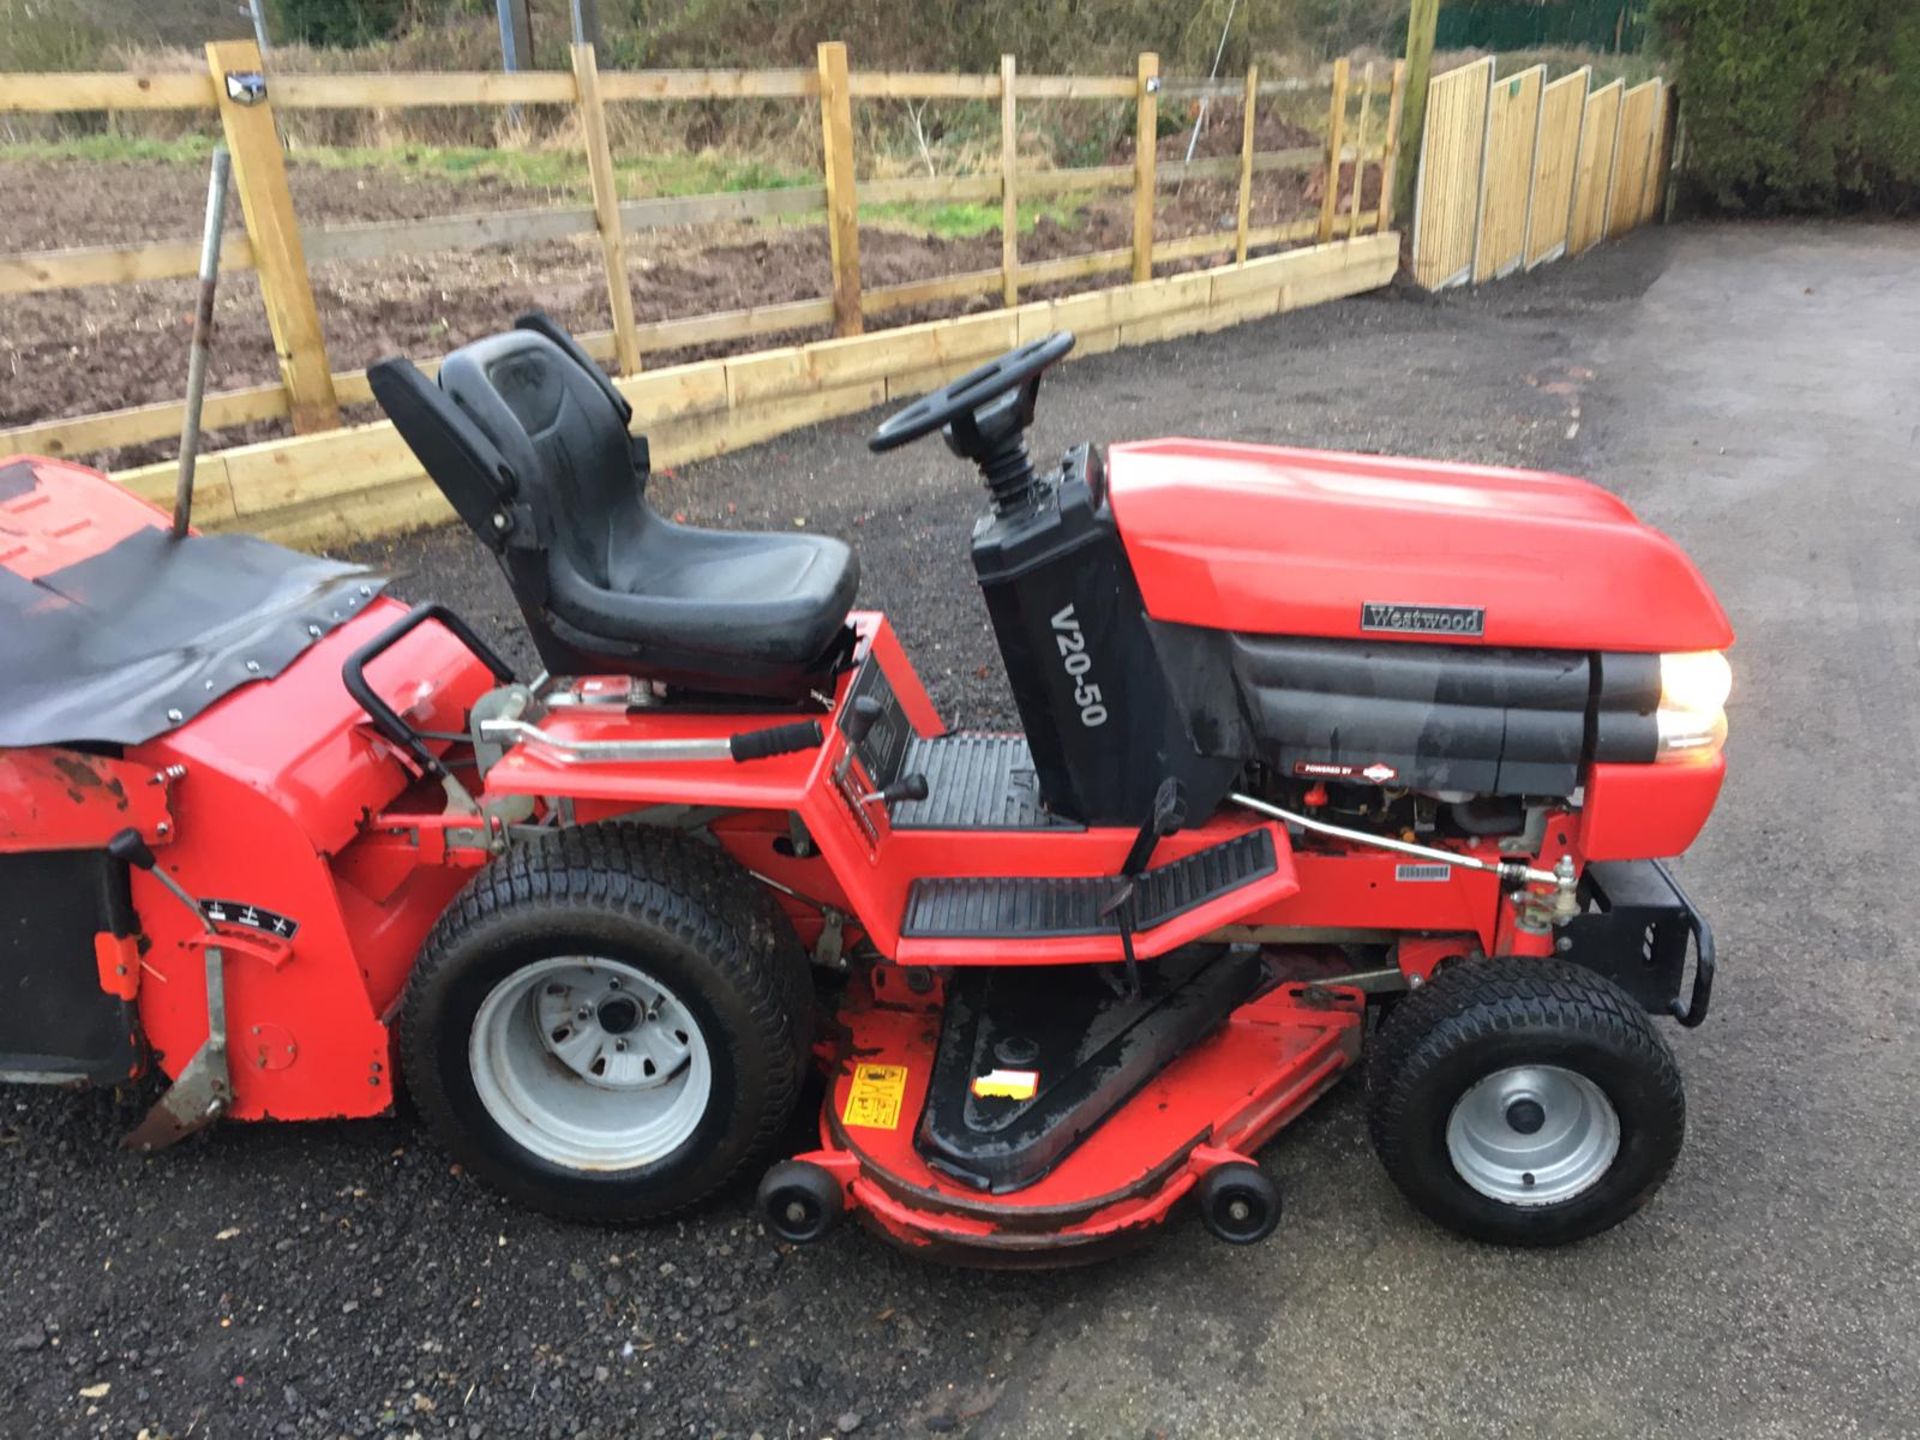 WESTWOOD V20-50 RIDE ON LAWN MOWER / LAWN TRACTOR, YEAR 2006 *NO VAT*